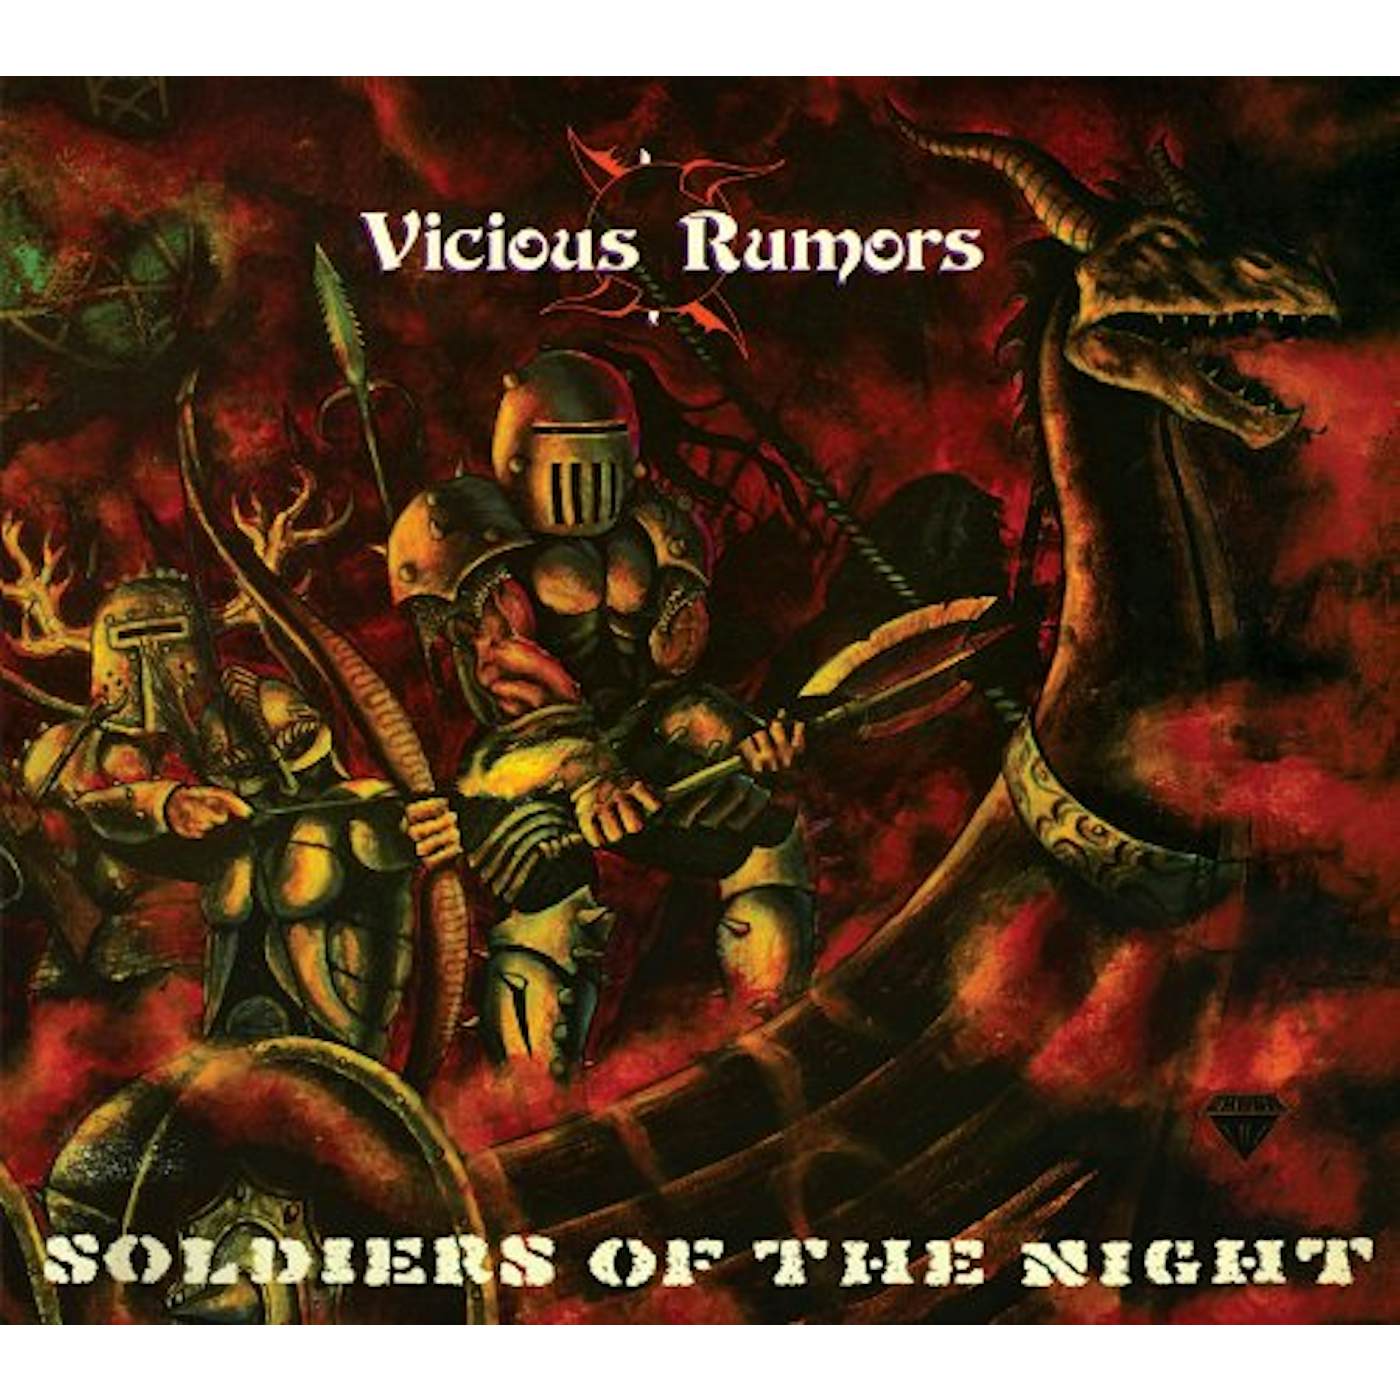 Vicious Rumors SOLDIERS OF THE NIGHT CD